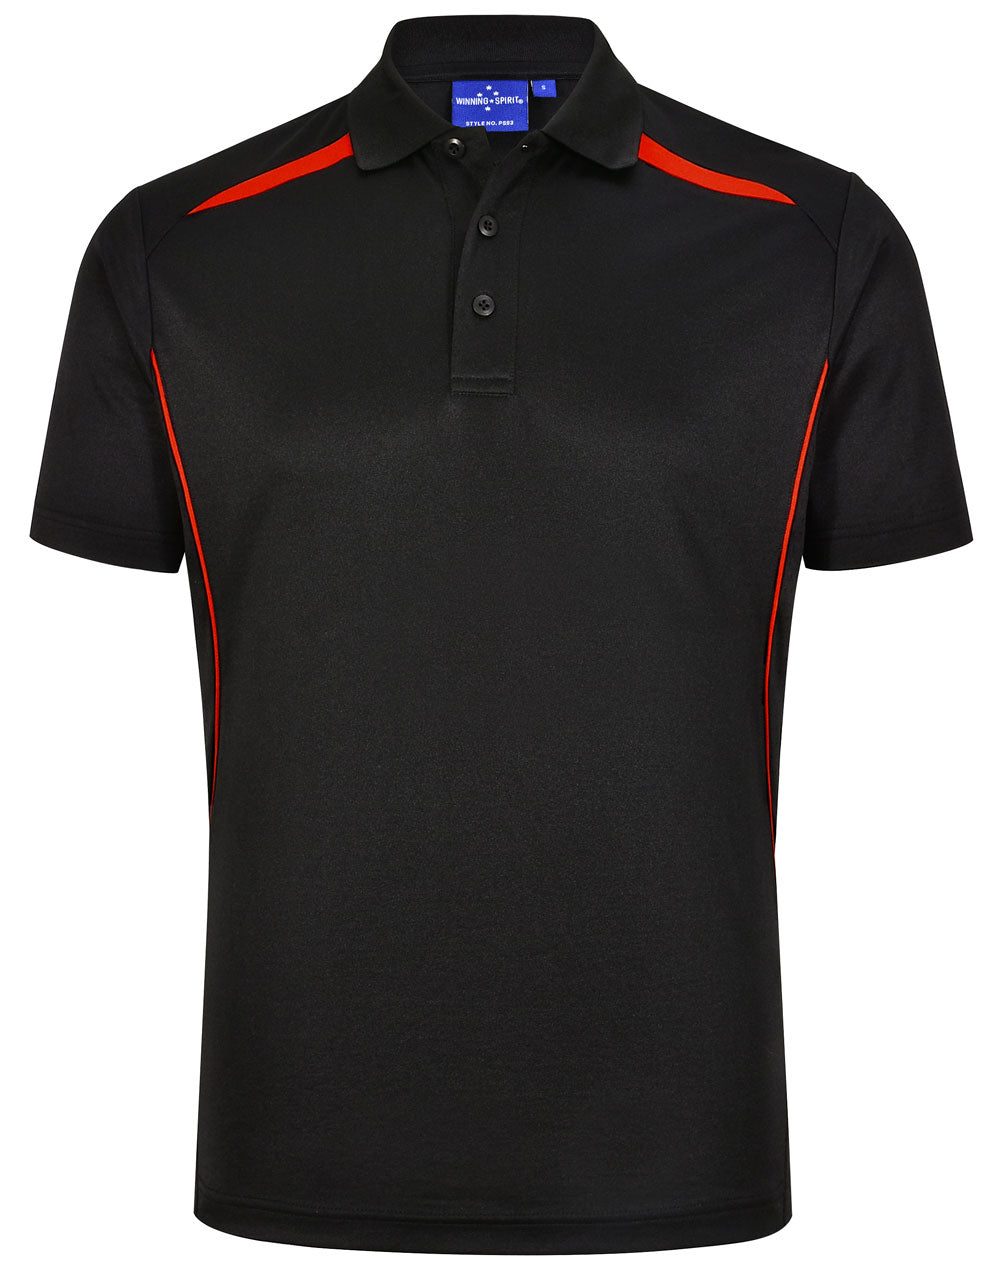 Winning Spirit Men's Sustainable Poly-Cotton Contrast Polo PS93 Casual Wear Winning Spirit Black/Red XS 